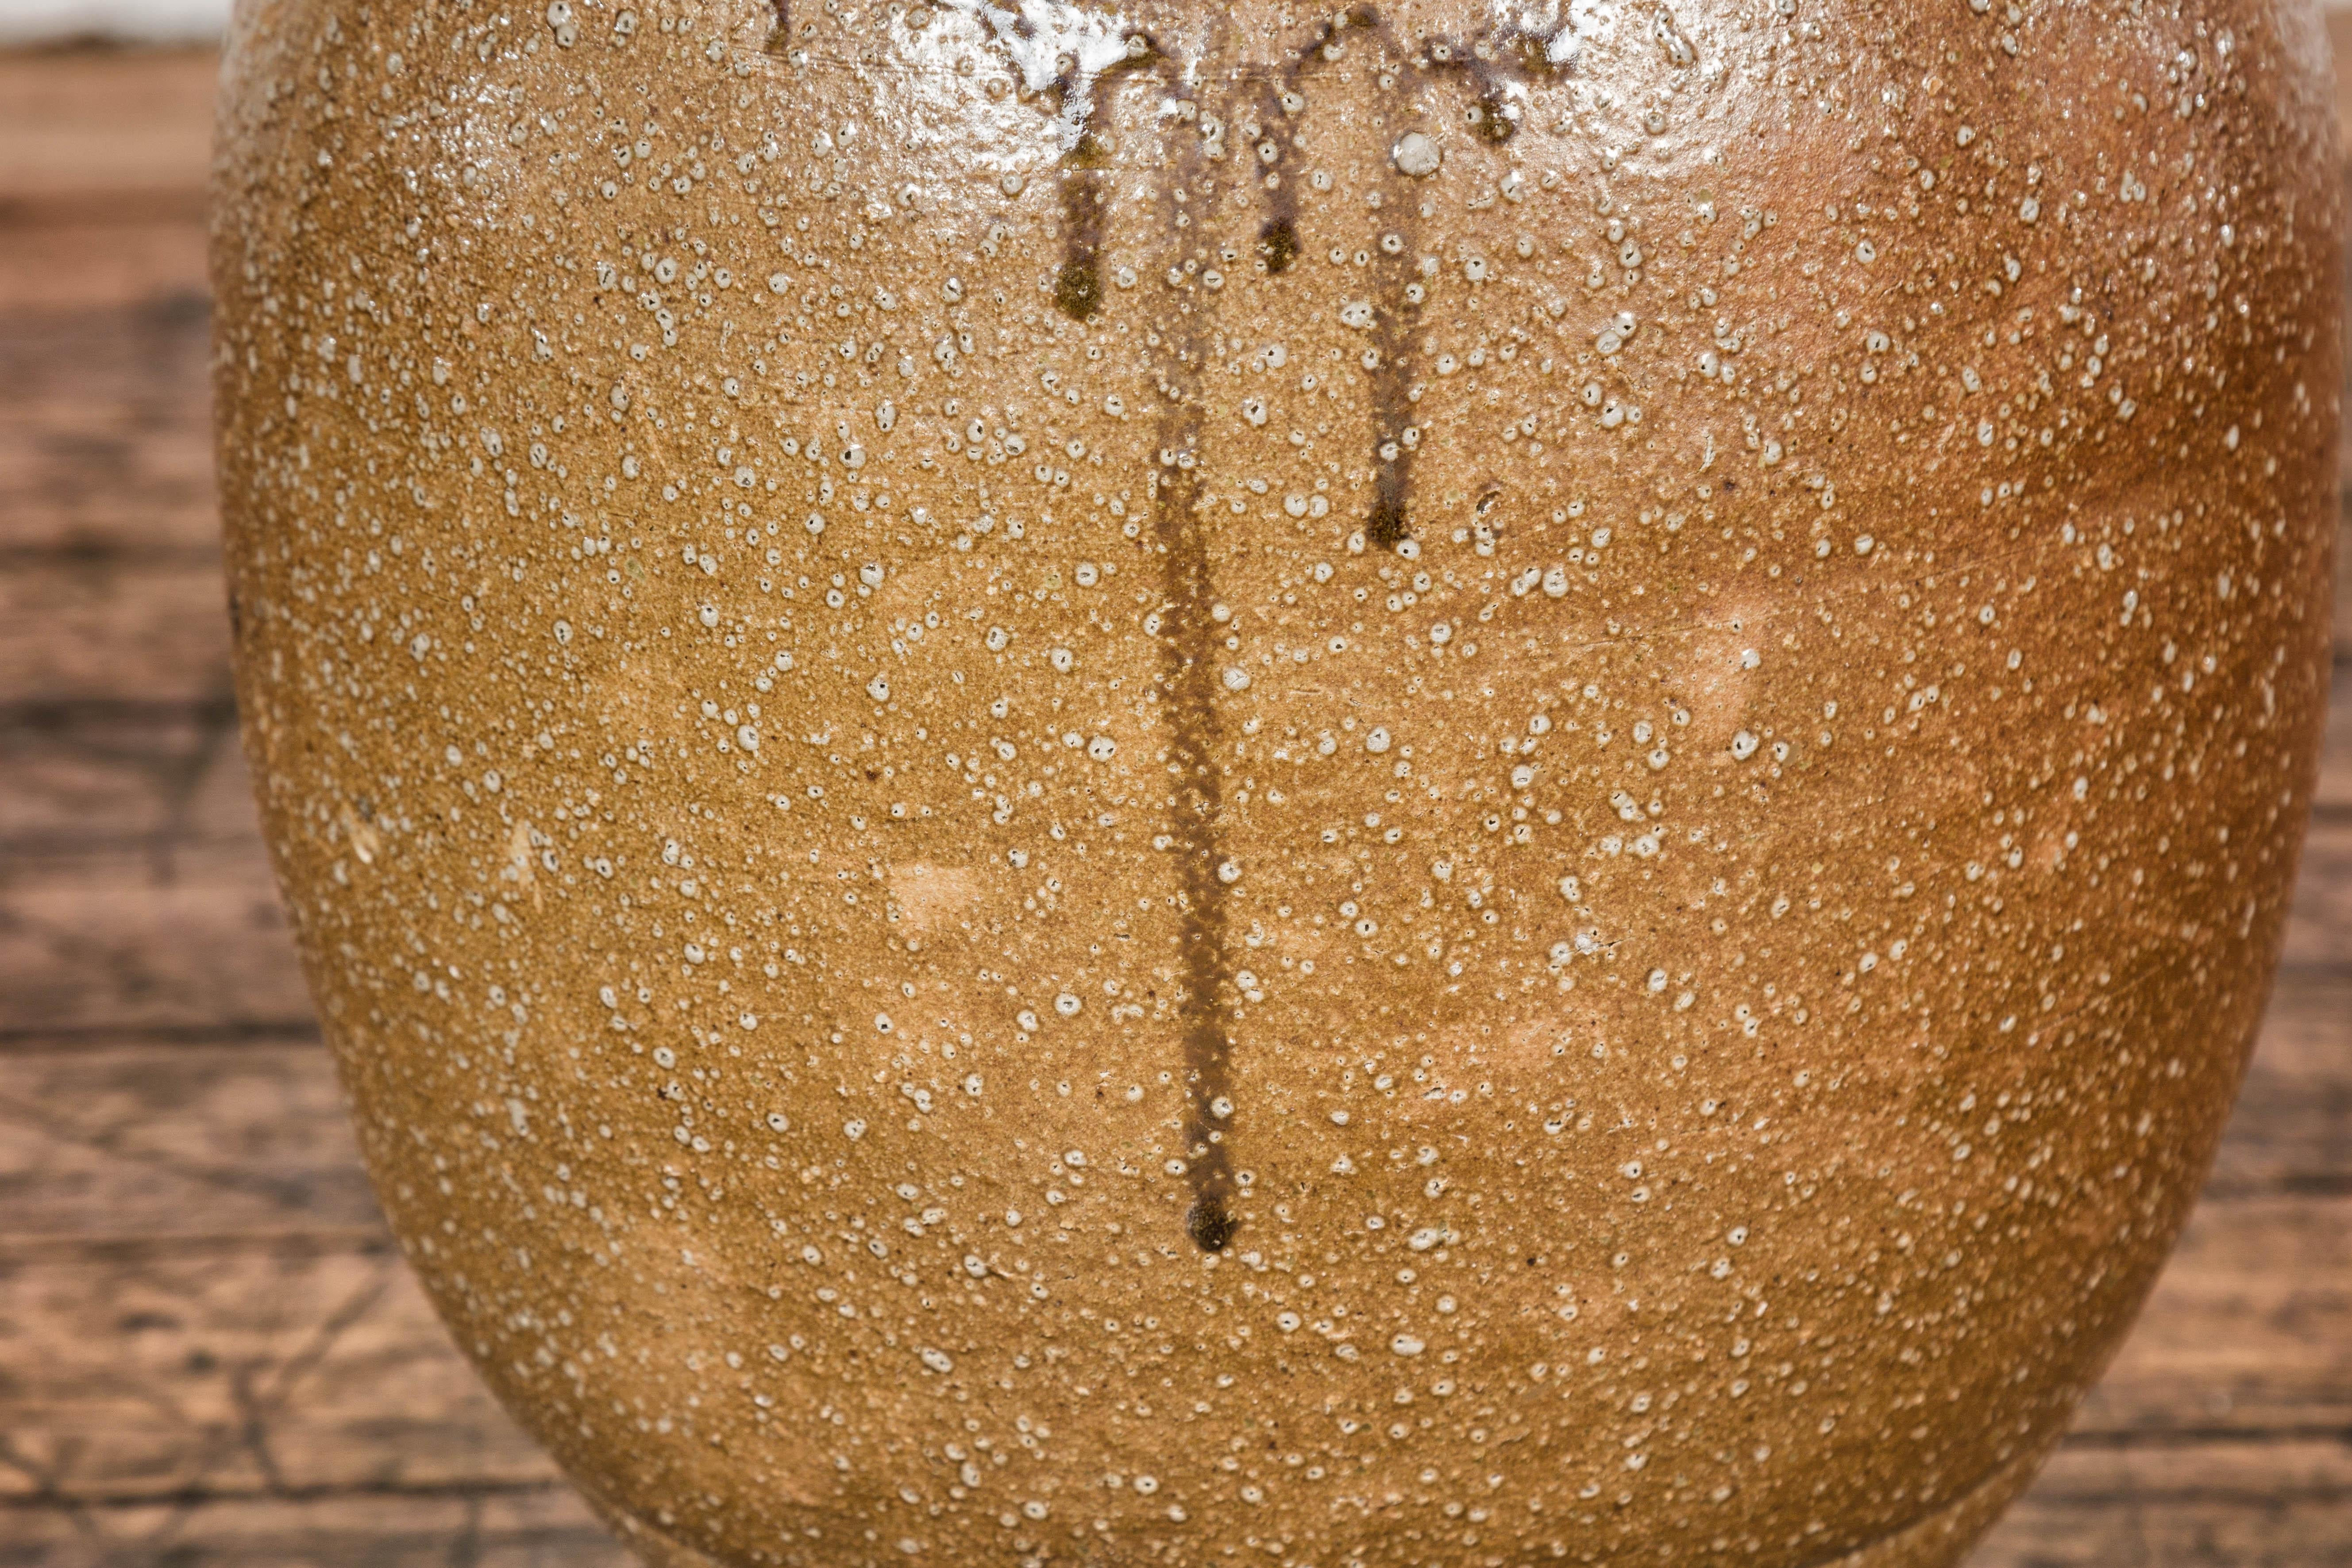 Japanese Taishō Period Sand Glaze Vase with Dripping Finish, circa 1900 For Sale 1